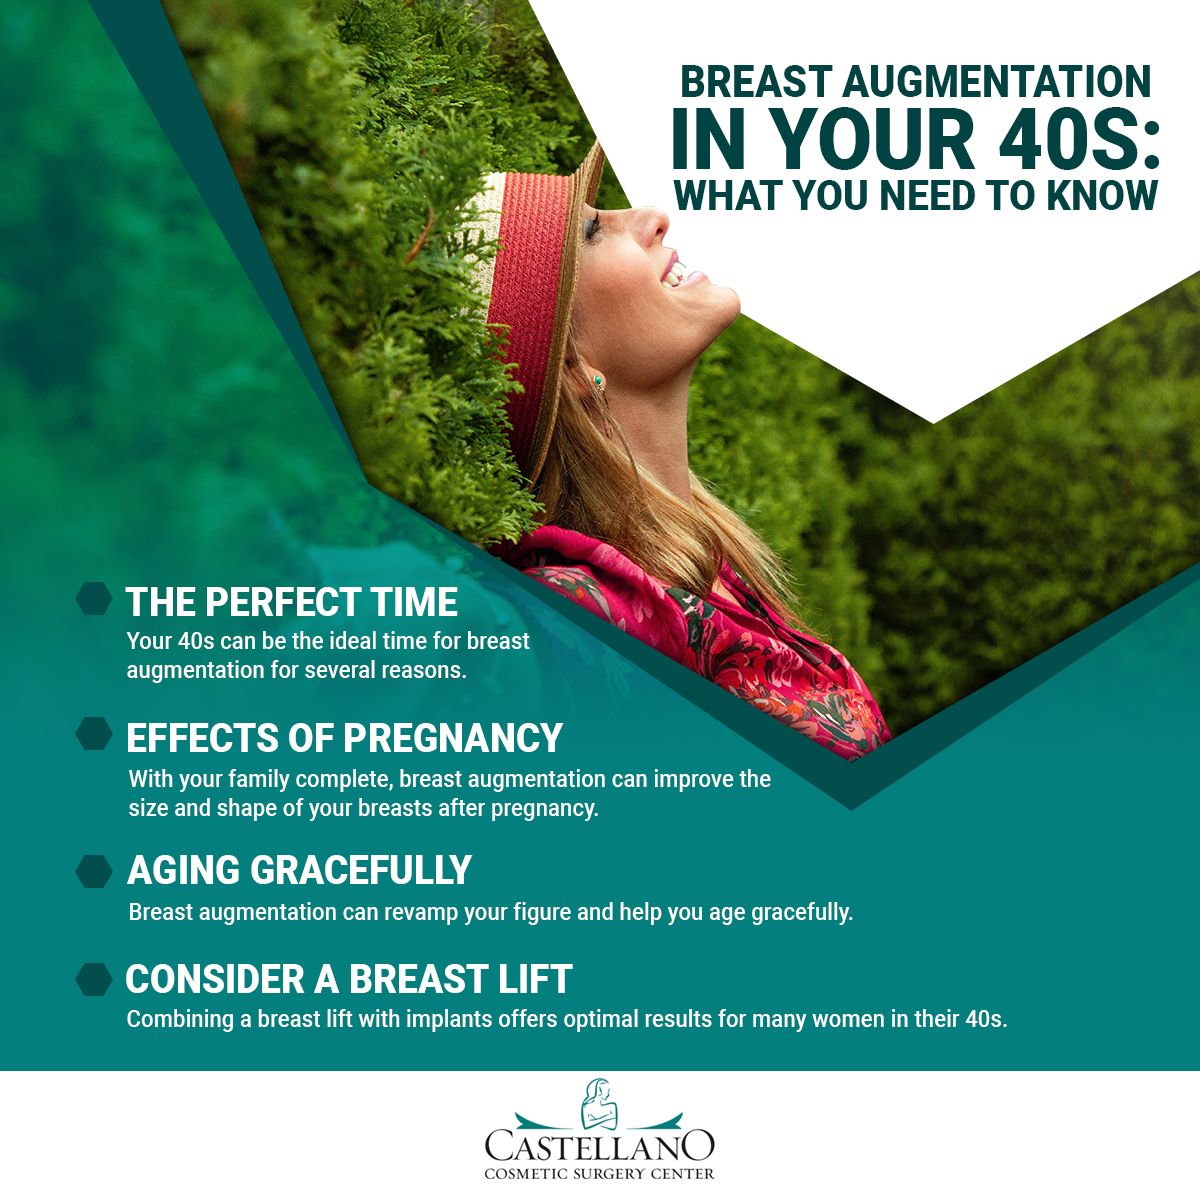 Breast Augmentation In Your 40s: What You Need To Know [Infographic] img 1